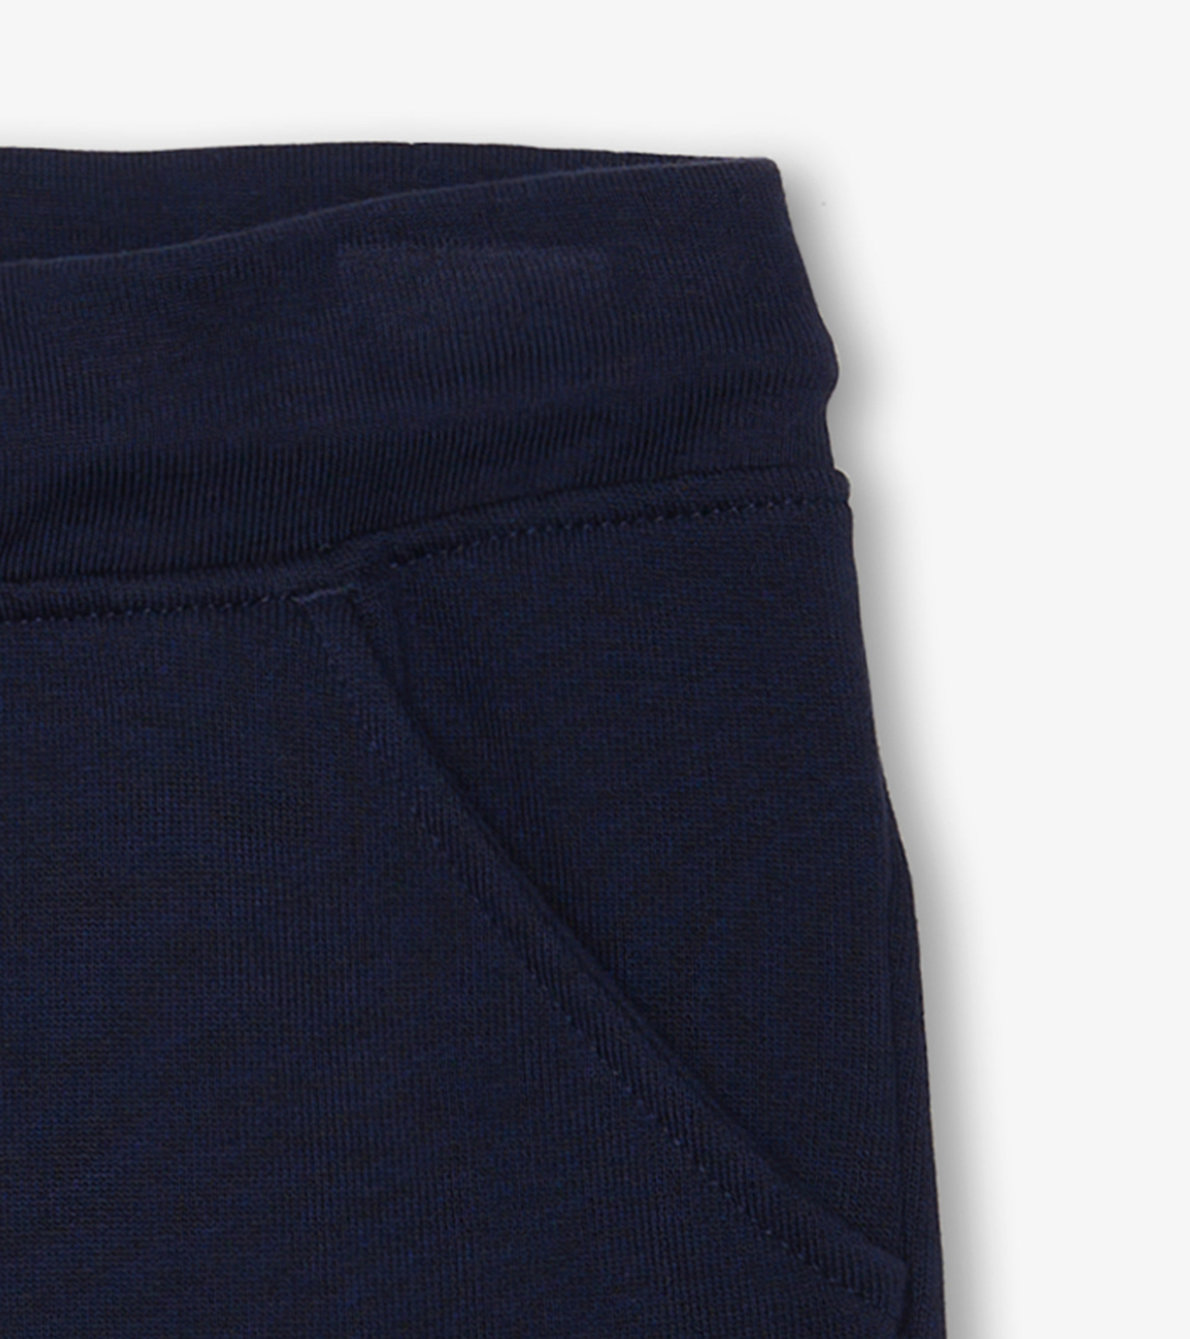 View larger image of Boys Navy Terry Shorts